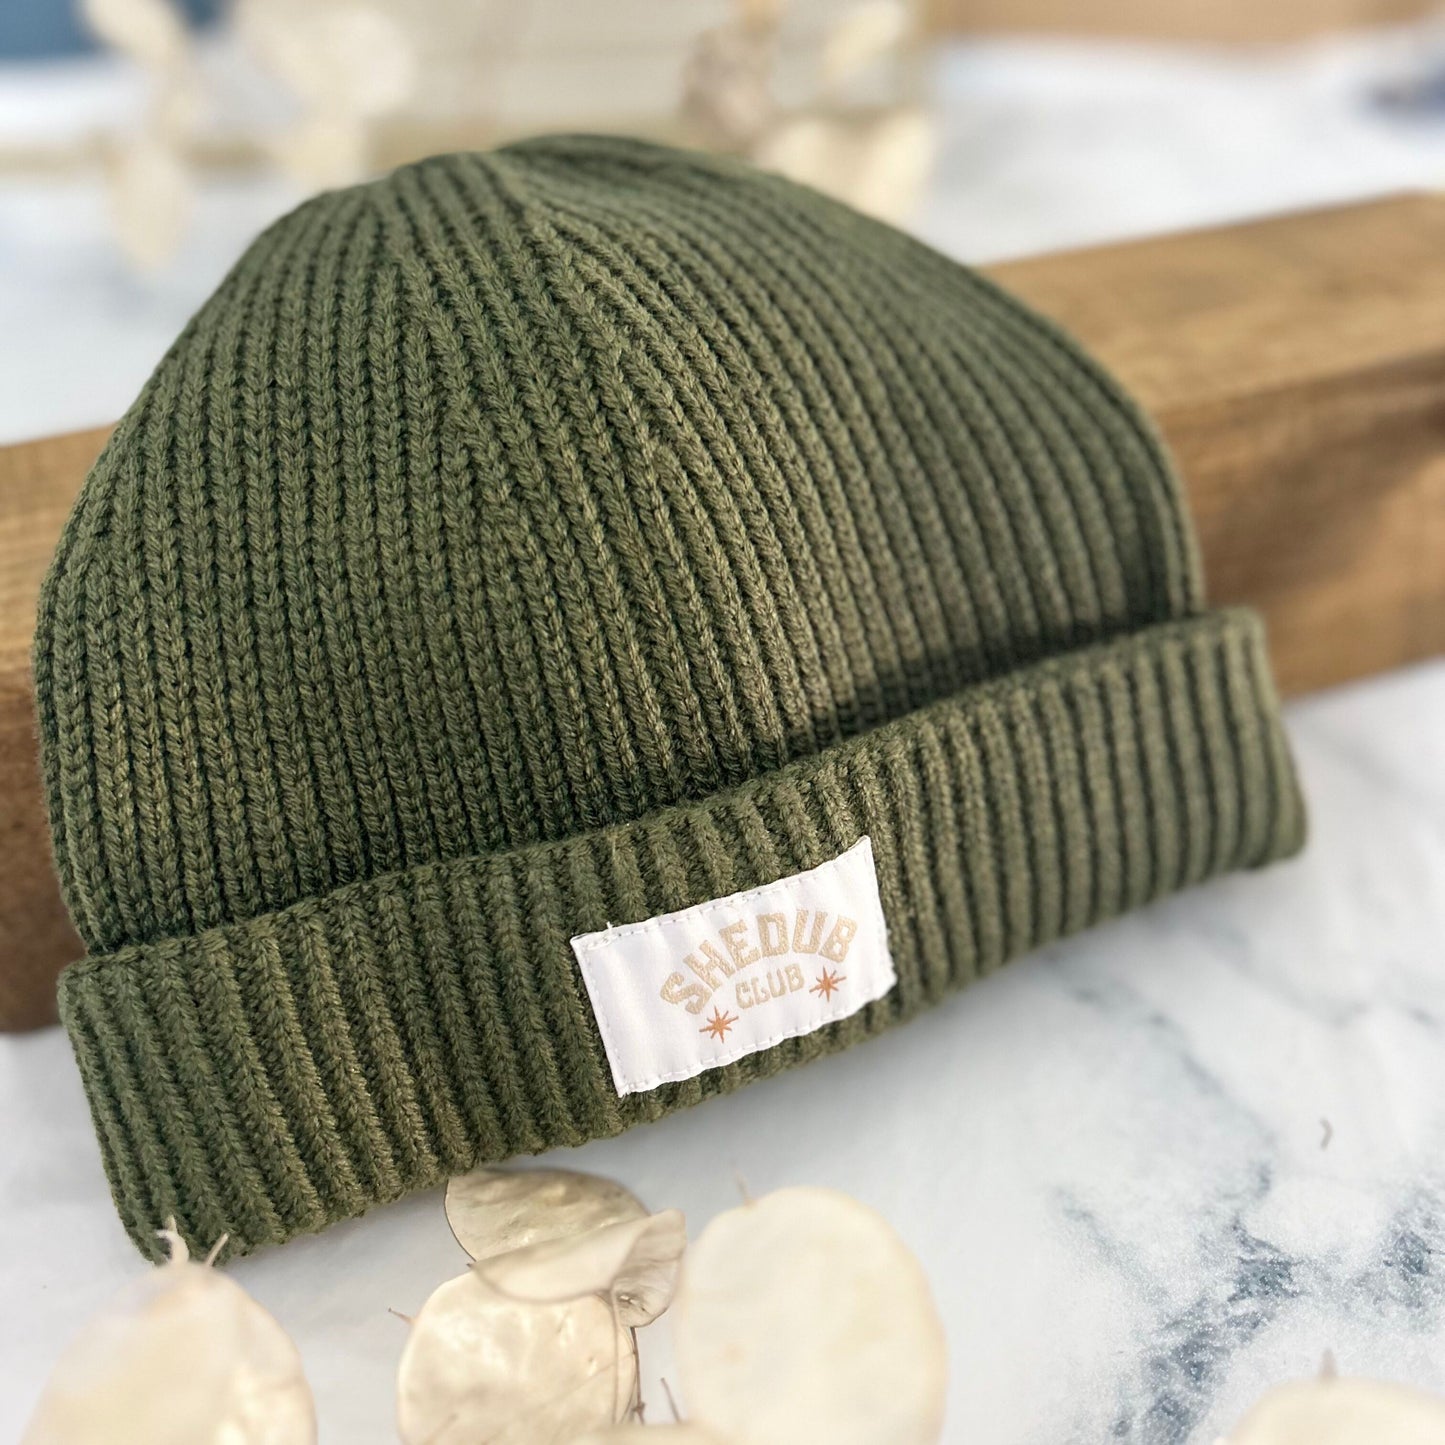 ribbed beanie colour olive with embroidered shedub club